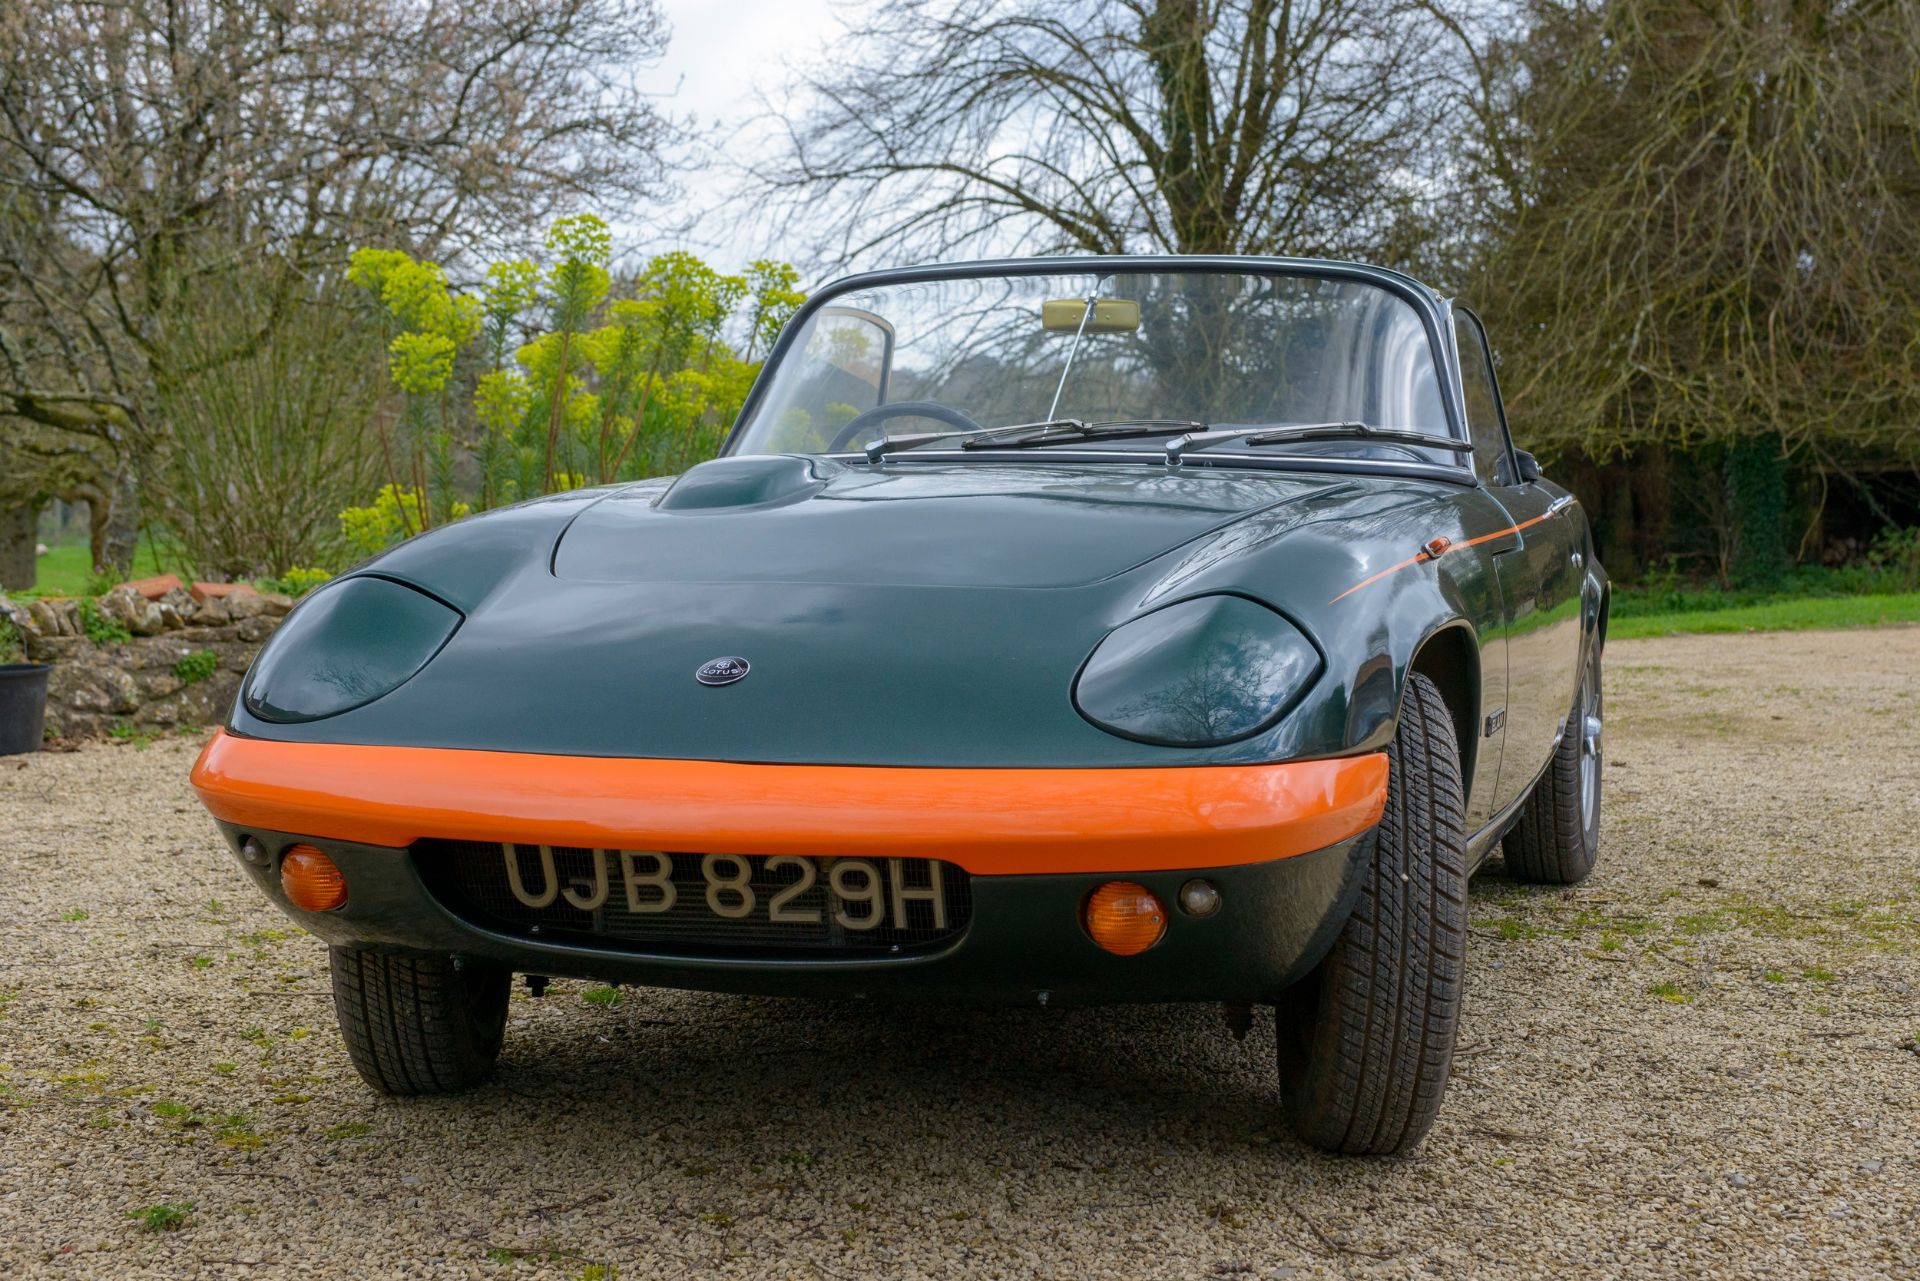 1969 LOTUS ELAN SERIES 4 BRM DROPHEAD COUPE Chassis Number: 45/9498 Registration Number: UJB 829H - Image 4 of 33